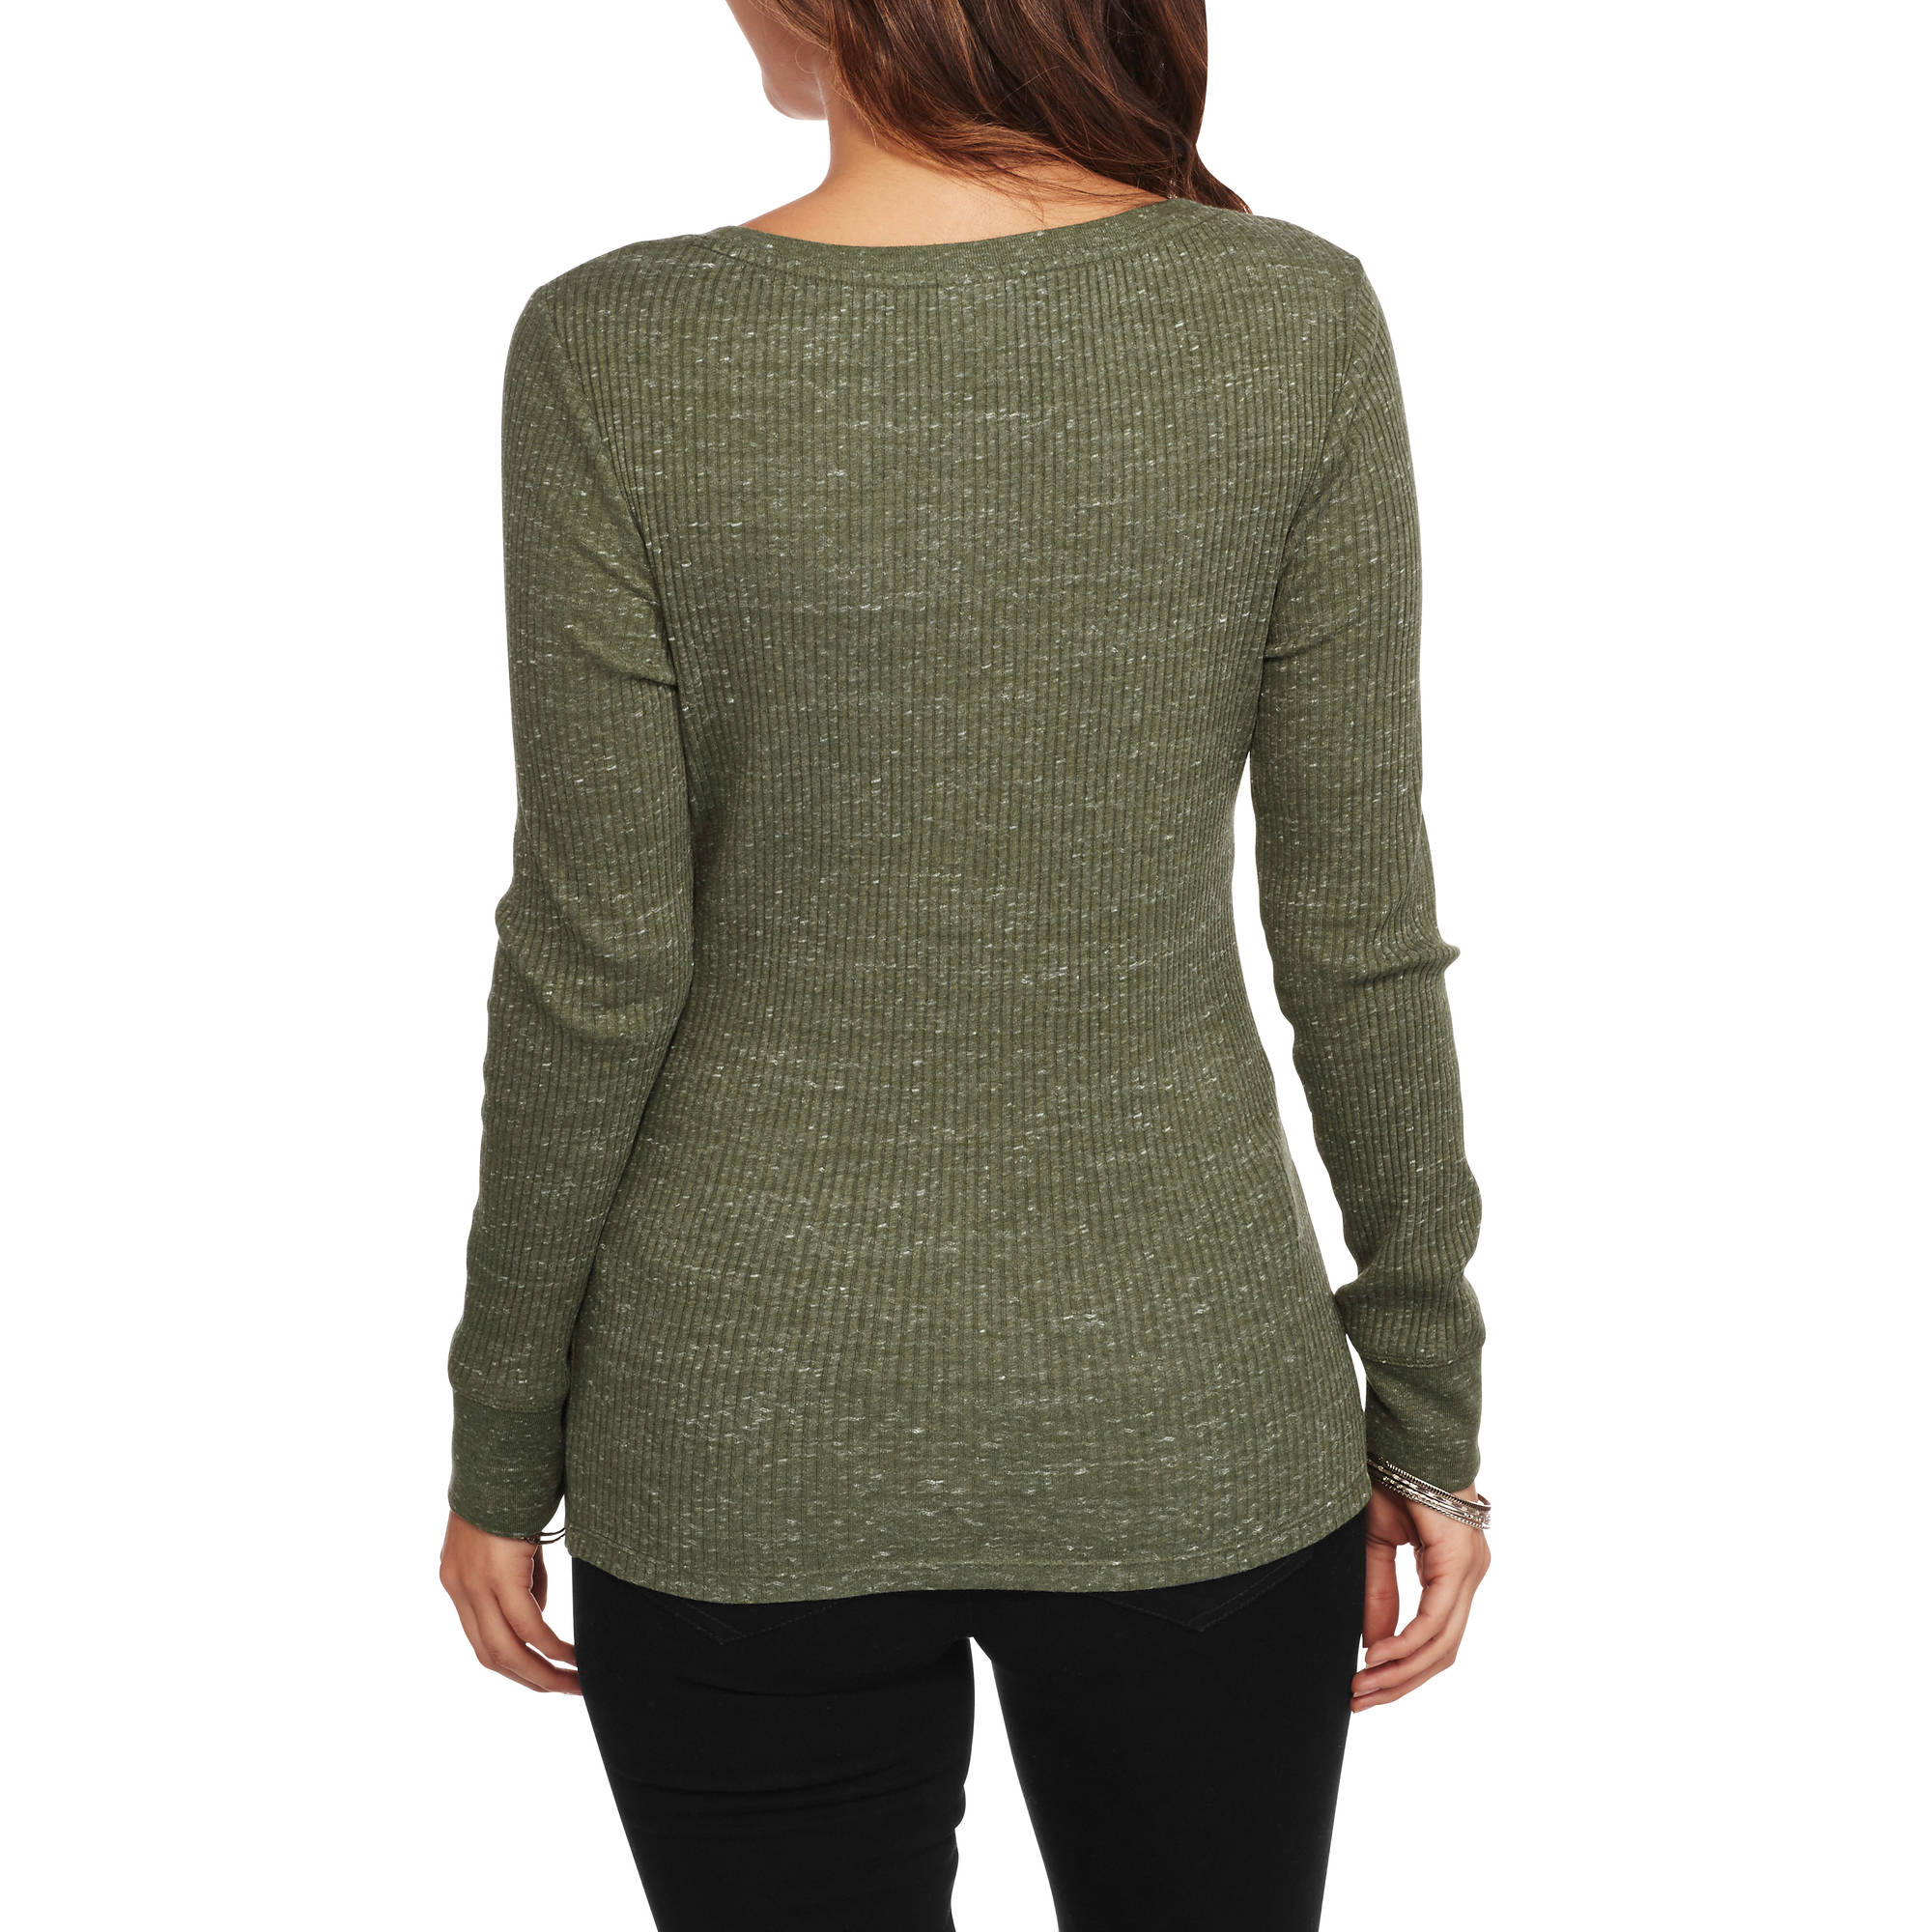 Women's Ribbed Long Sleeve Scoopneck T-Shirt - image 2 of 2